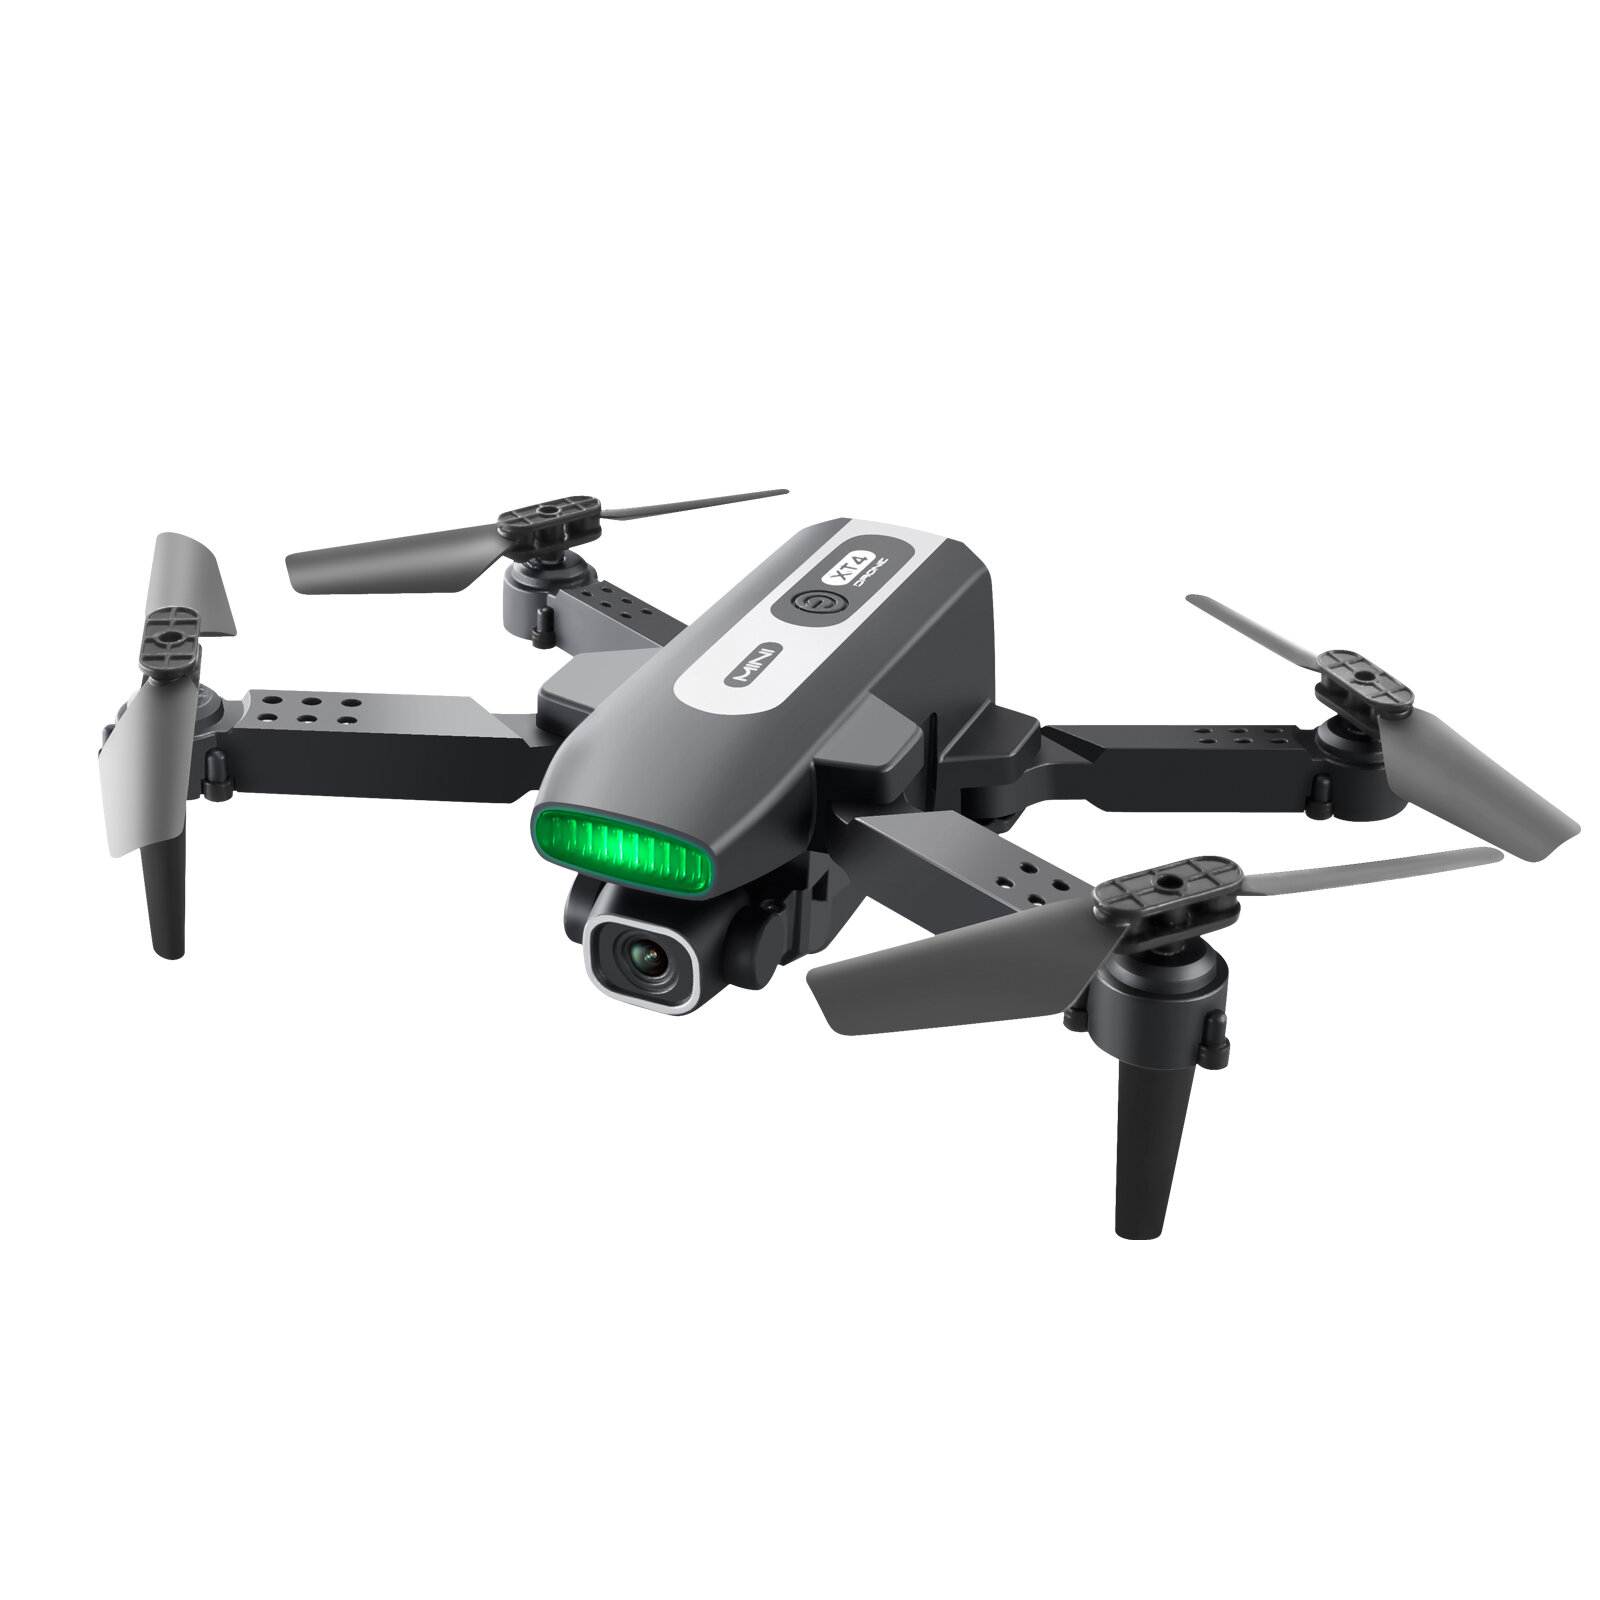 LSRC XT4 LS-XT4 Mini WiFi FPV with HD Dual Camera Switchable Integrated Storage Altitude Hold Mode Foldable RC Toy Drone Quadcopter RTF COD